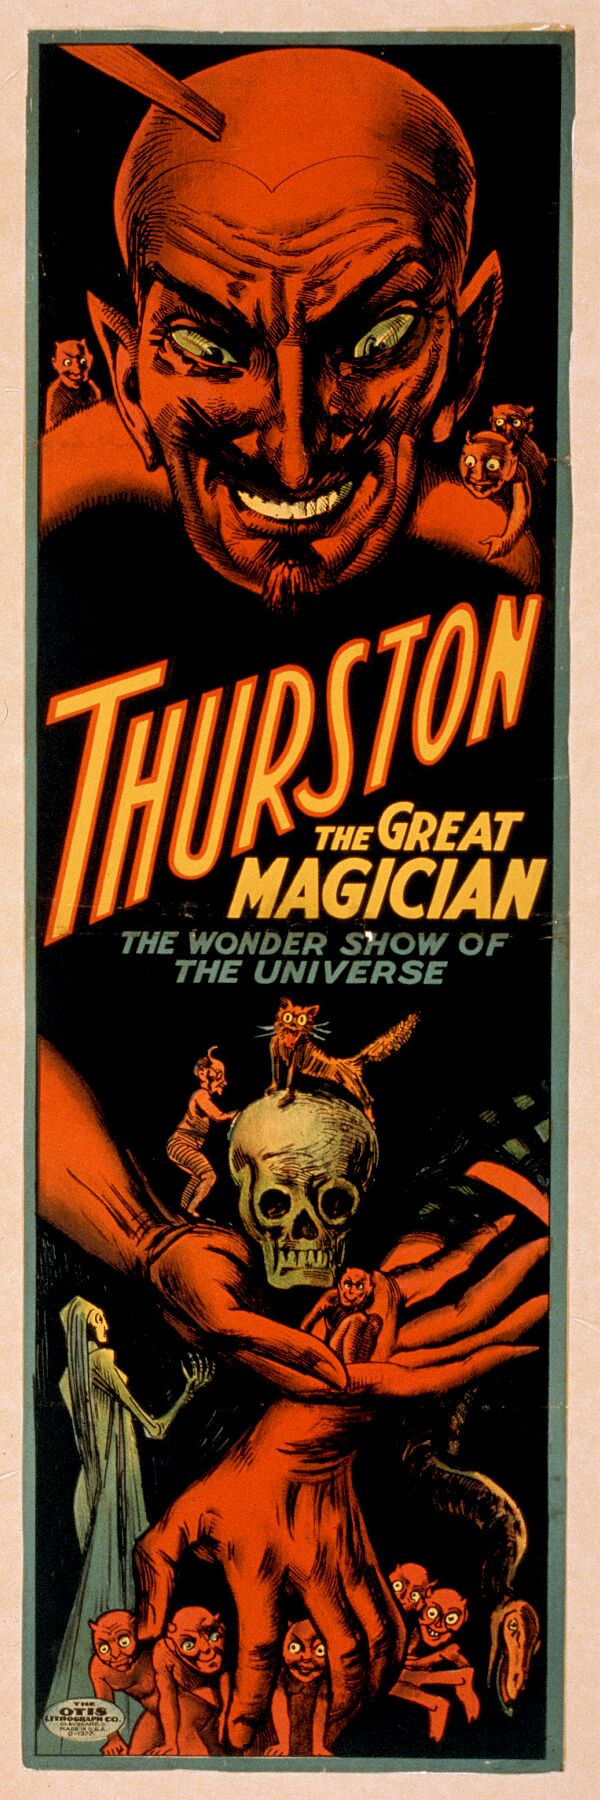 Thurston the great magician the wonder show of the universe. c1914